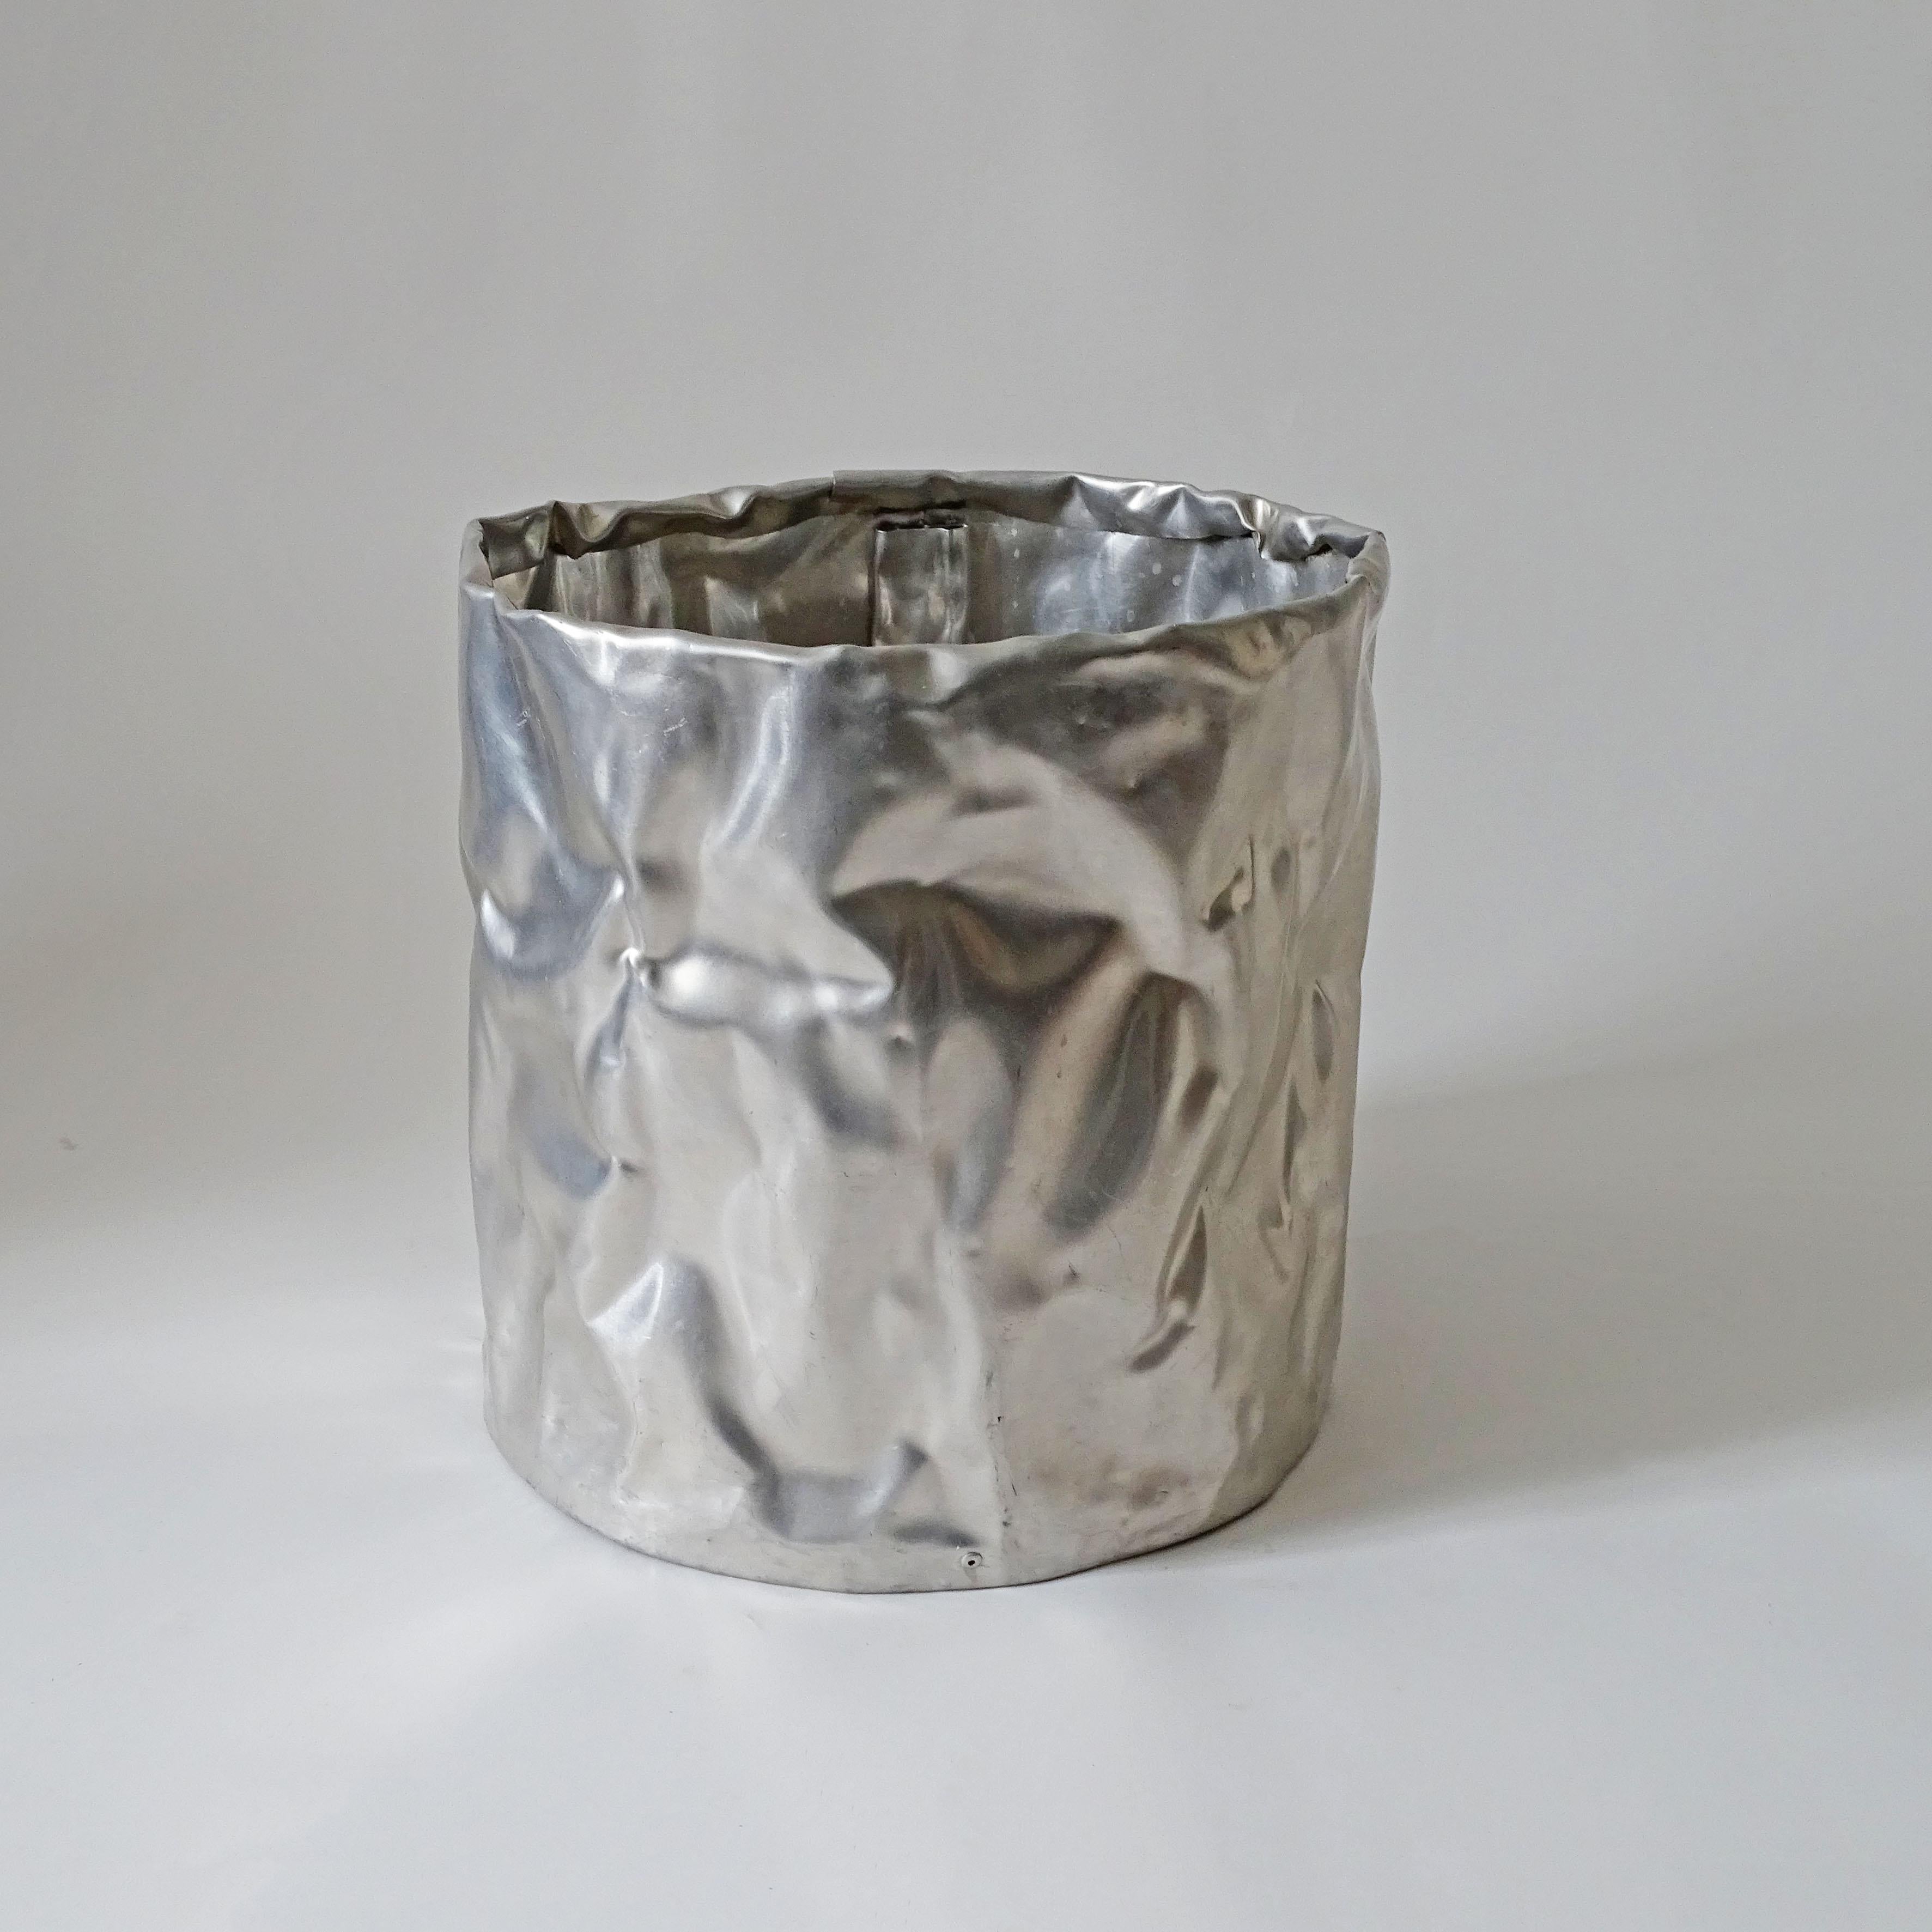 A Riveted, Hammered and Formed Aluminum Sheet Paper Waste Basket.
Similar to works by Shlomo Harush.